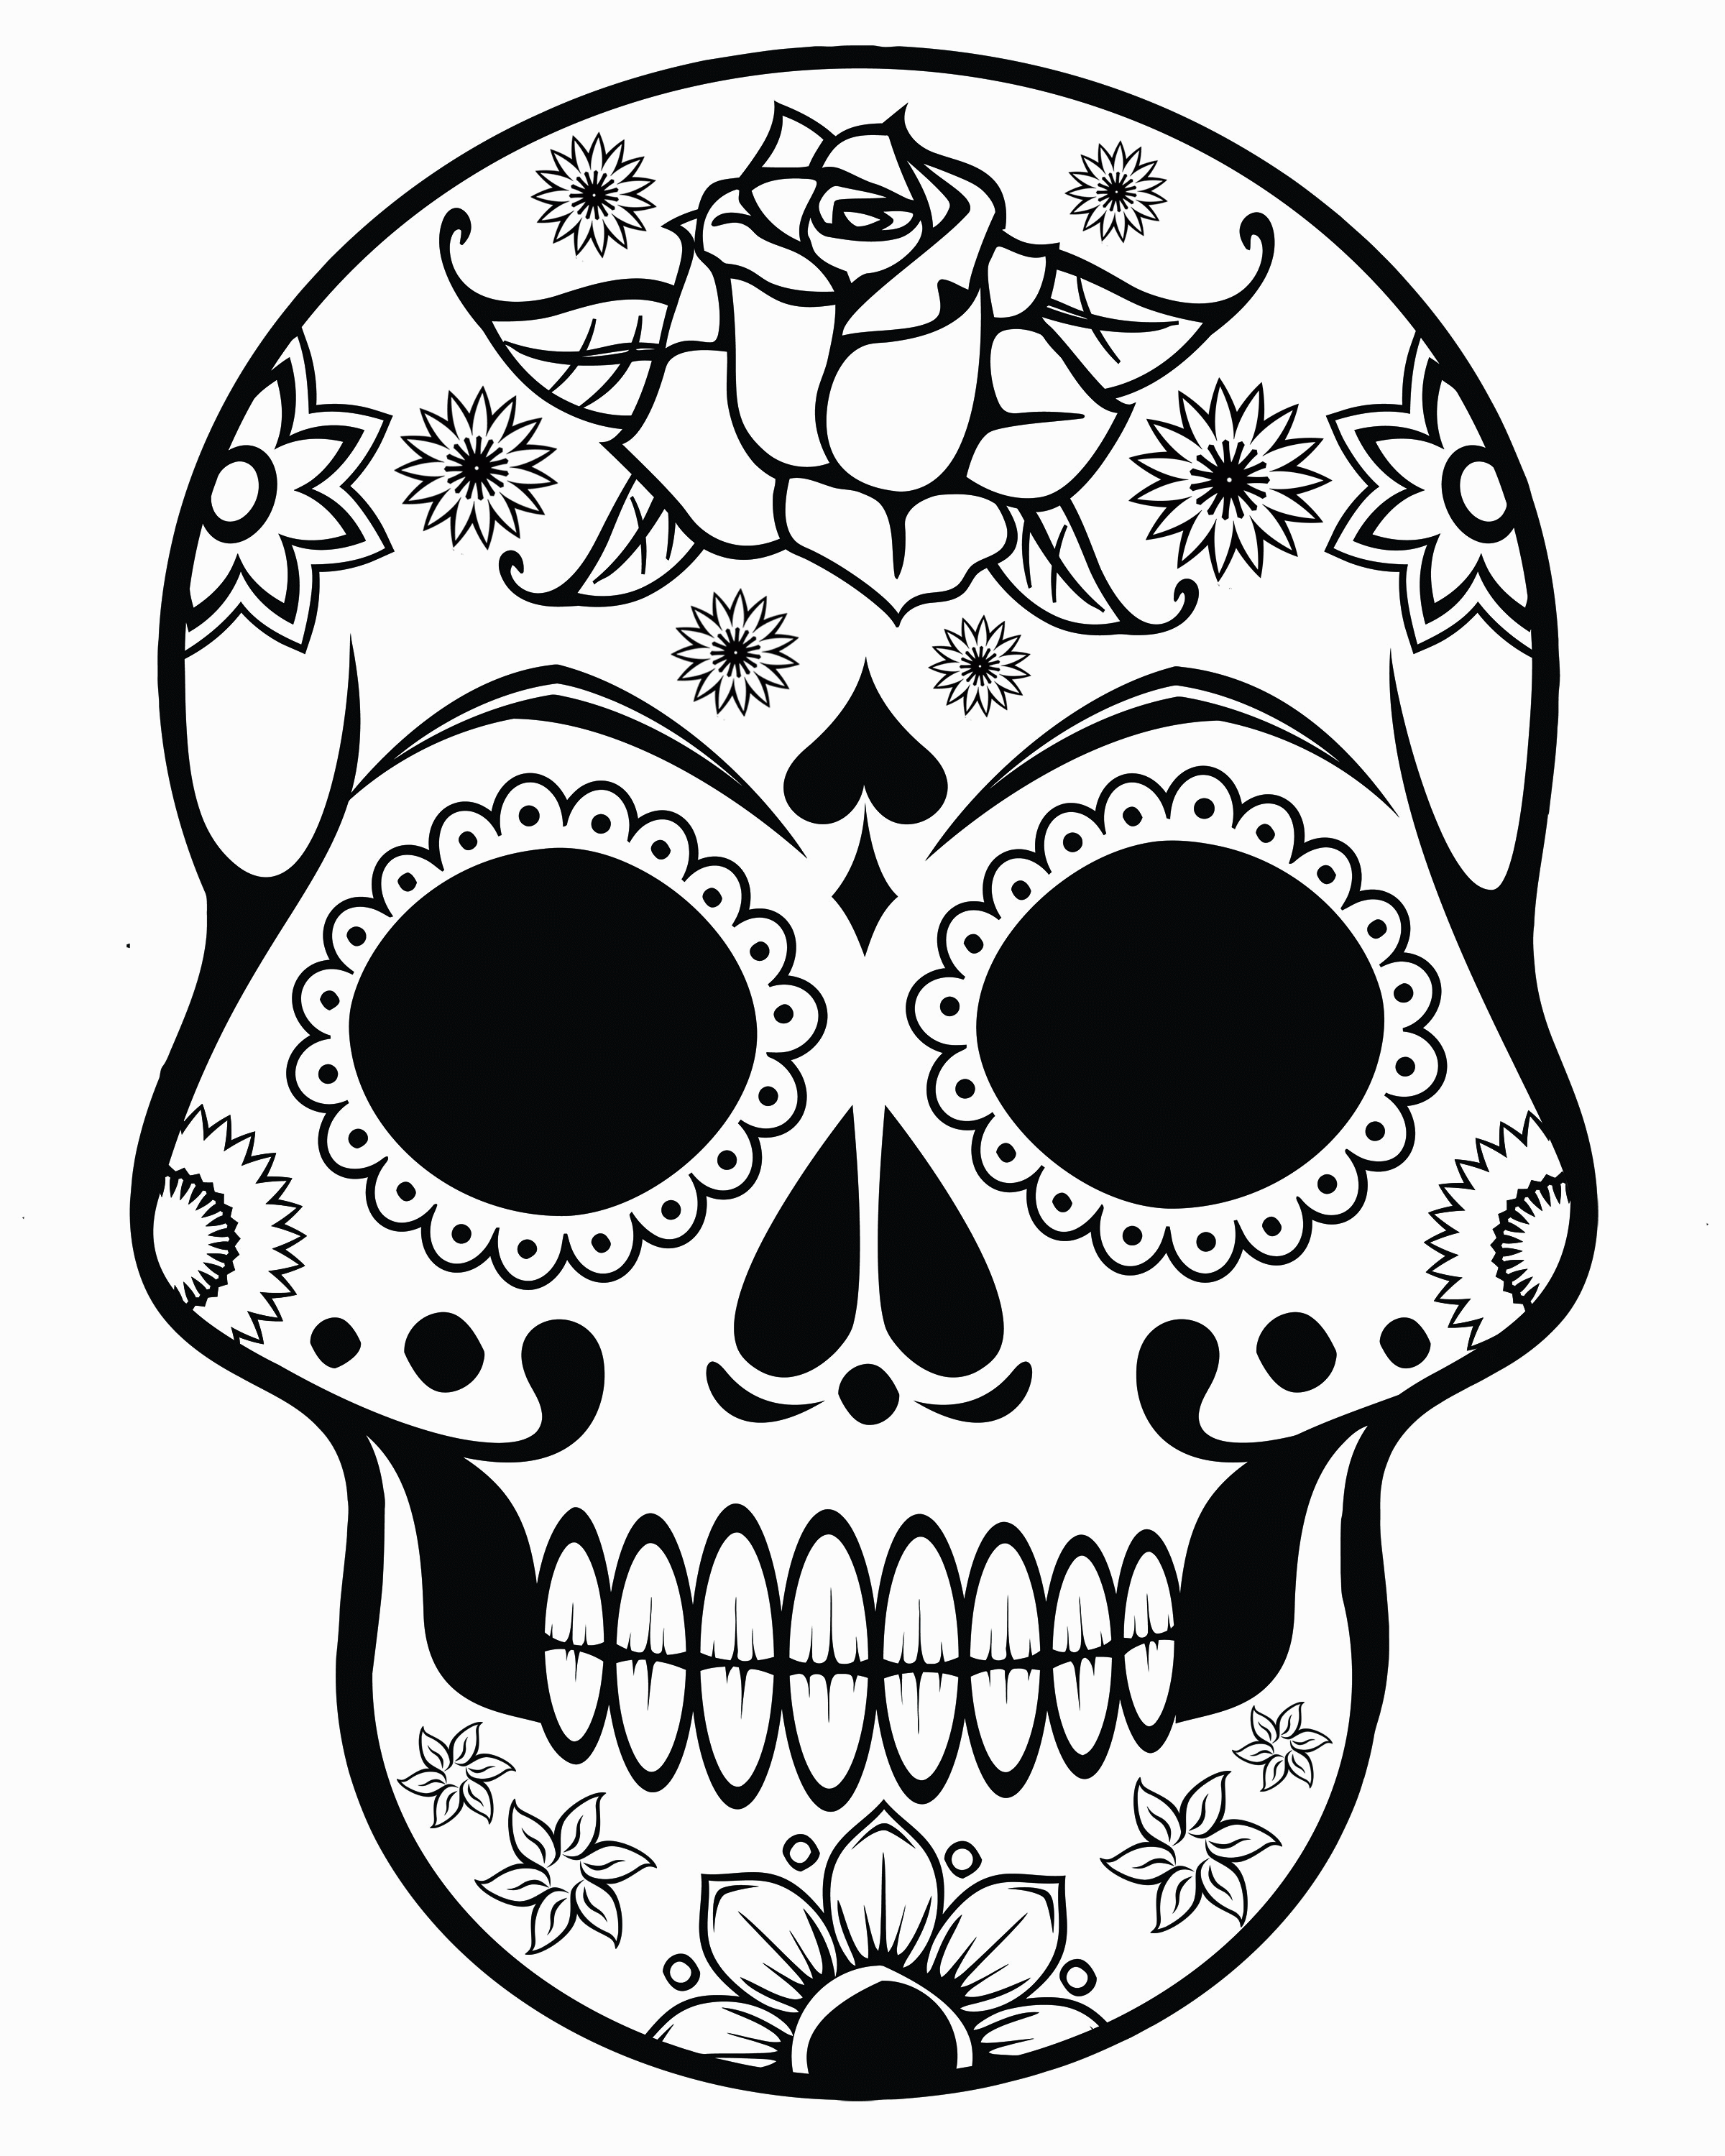 FREE Printable Halloween Coloring Pages for Adults - Sugar Skull ...